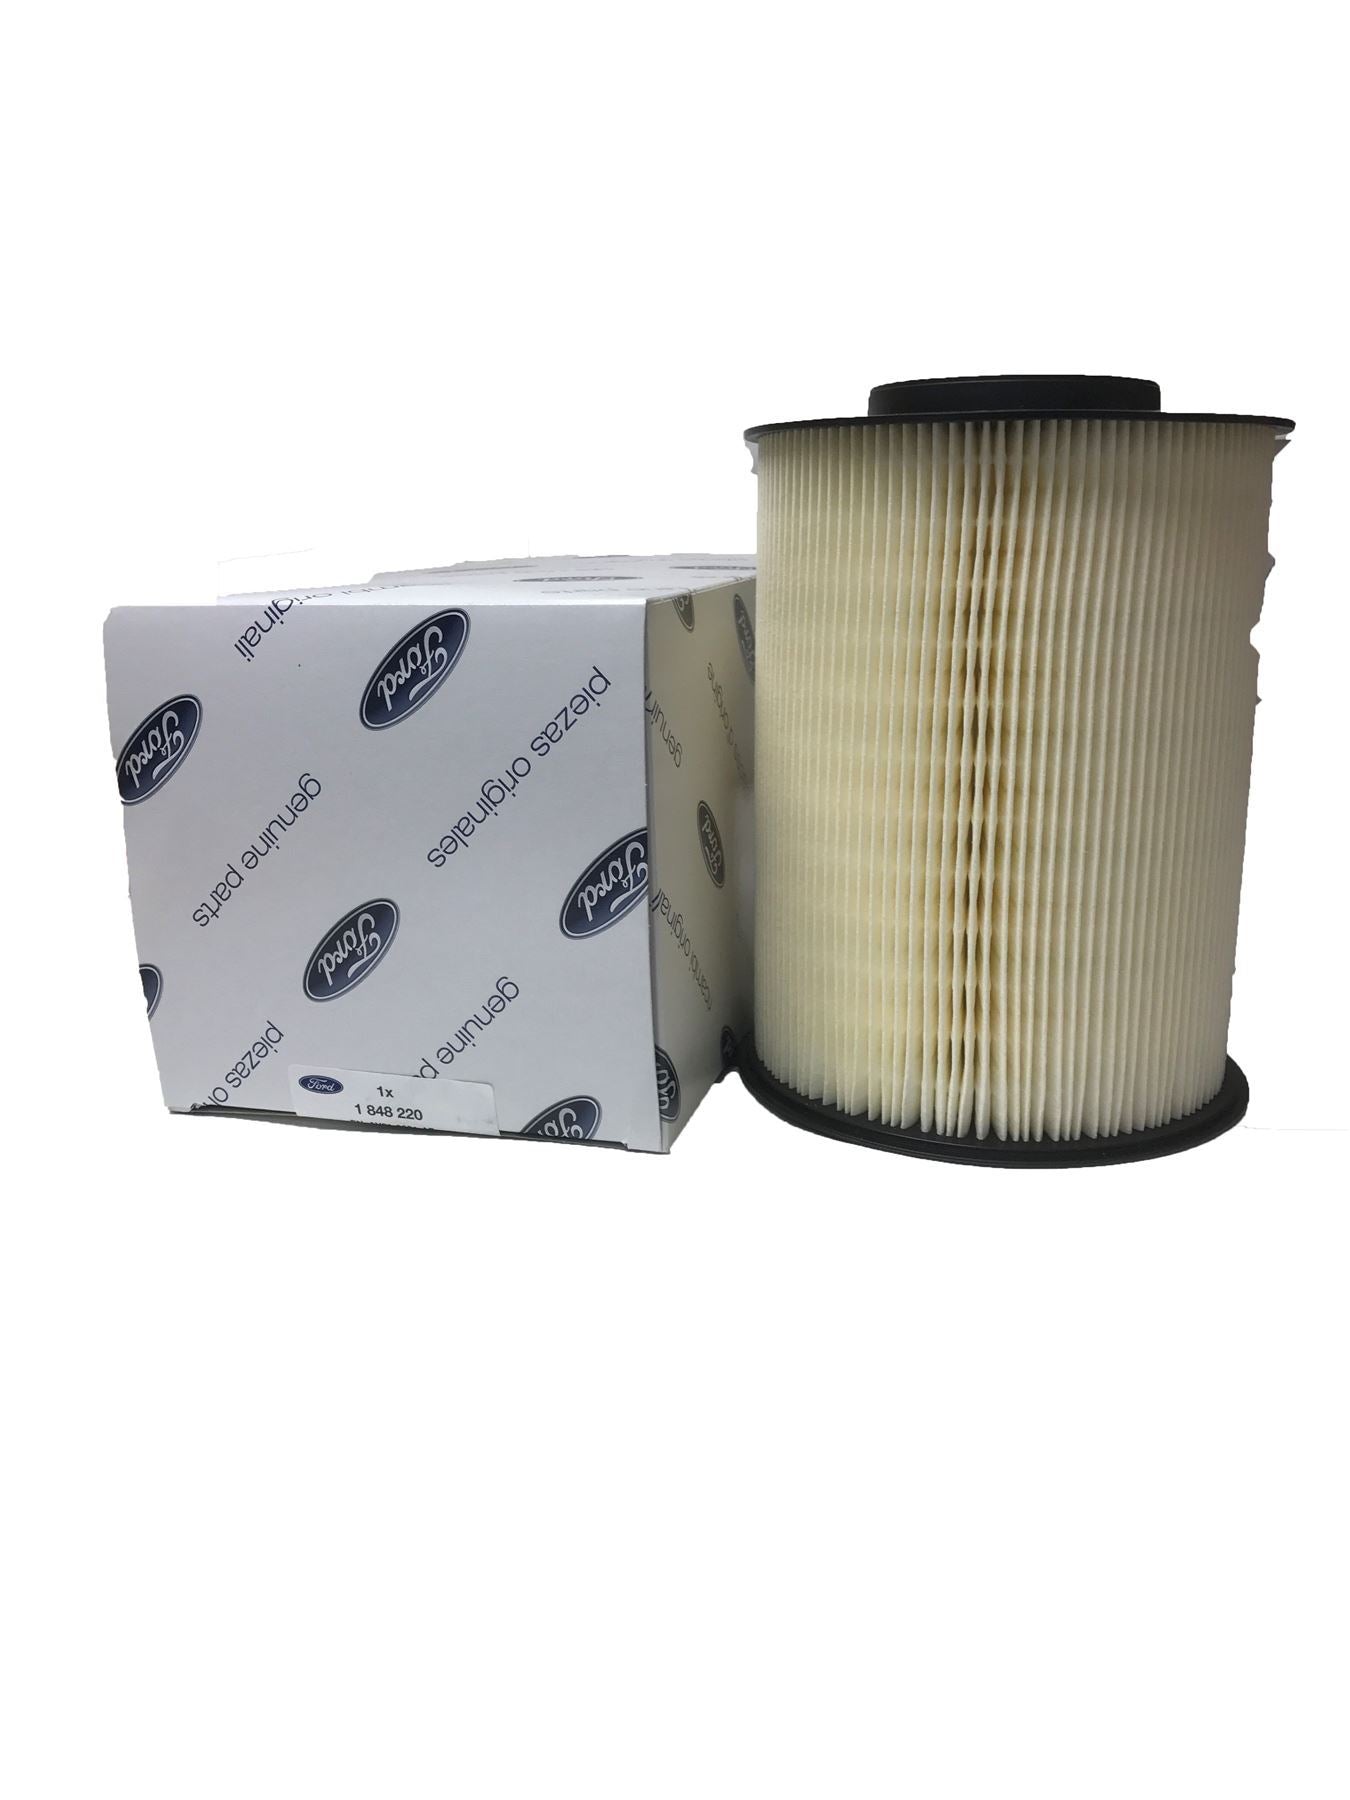 GENUINE FORD FOCUS III 1.5 TDCi 09.14 - 95HP ROUND TYPE AIR FILTER 1848220